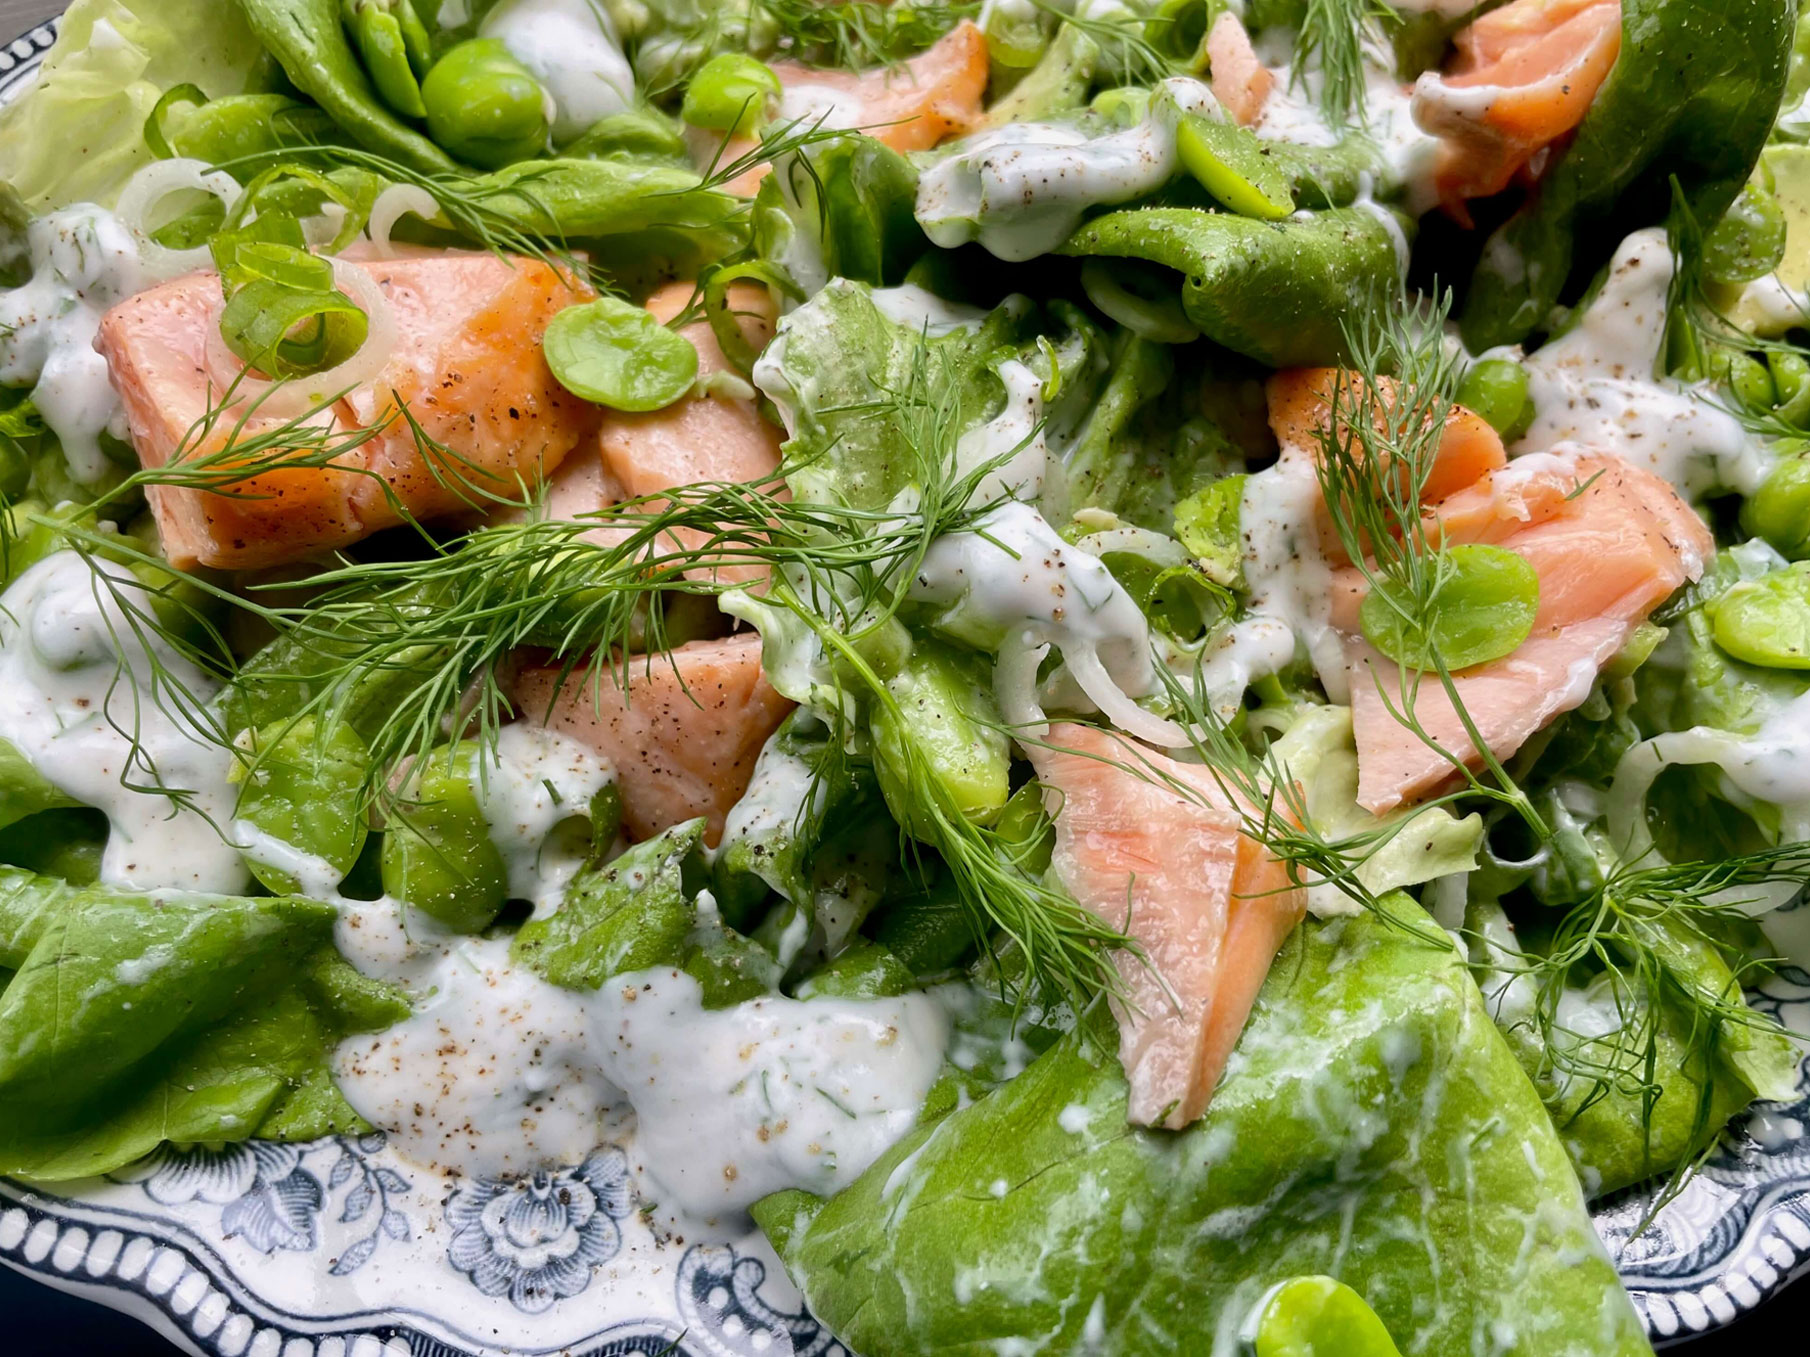 Grilled Salmon and Broad Bean Salad with Buttermilk Dill Dressing